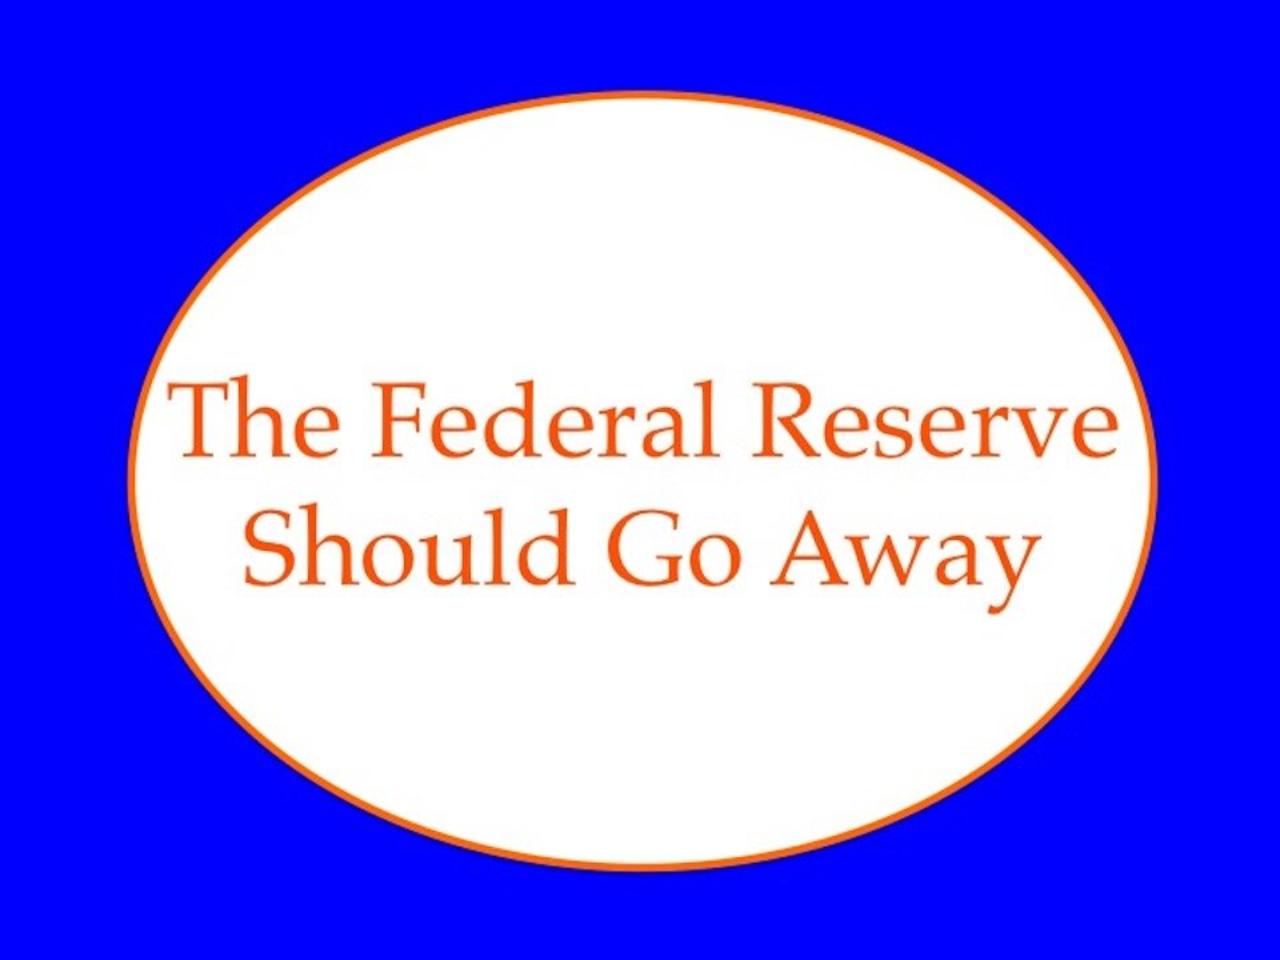 The Federal Reserve Should Go Away